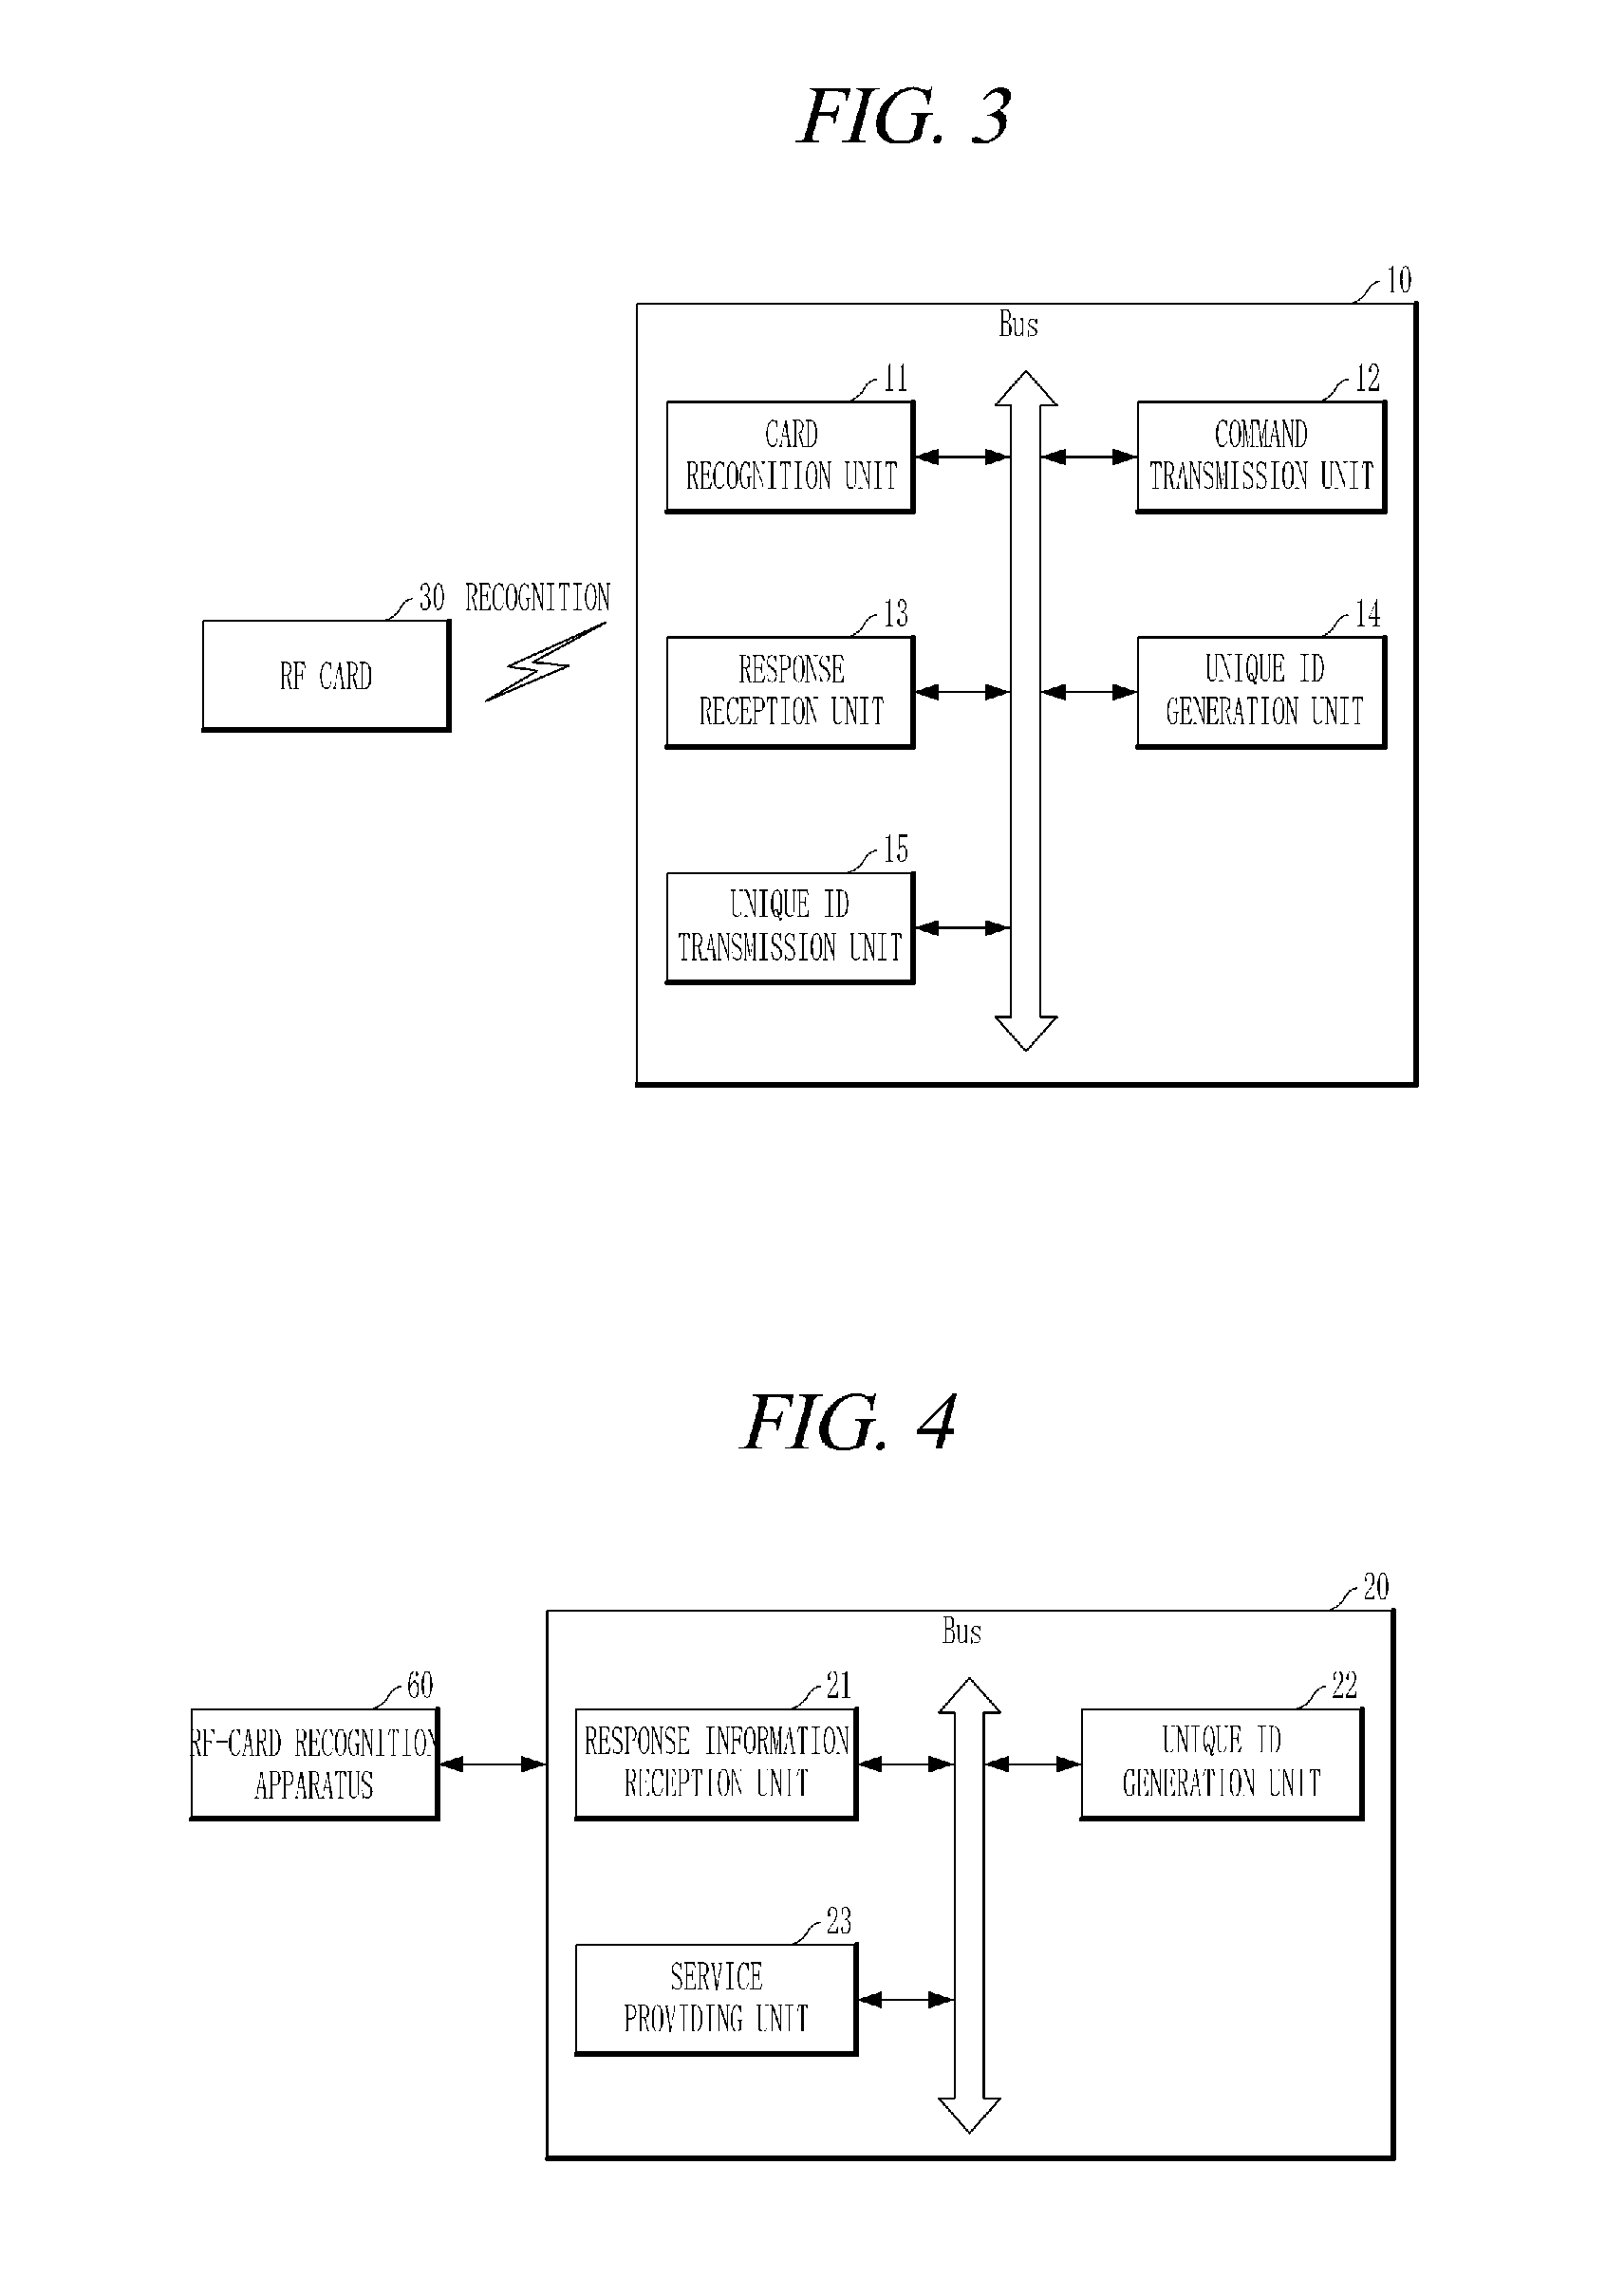 Apparatus and method for generating unique id of RF card